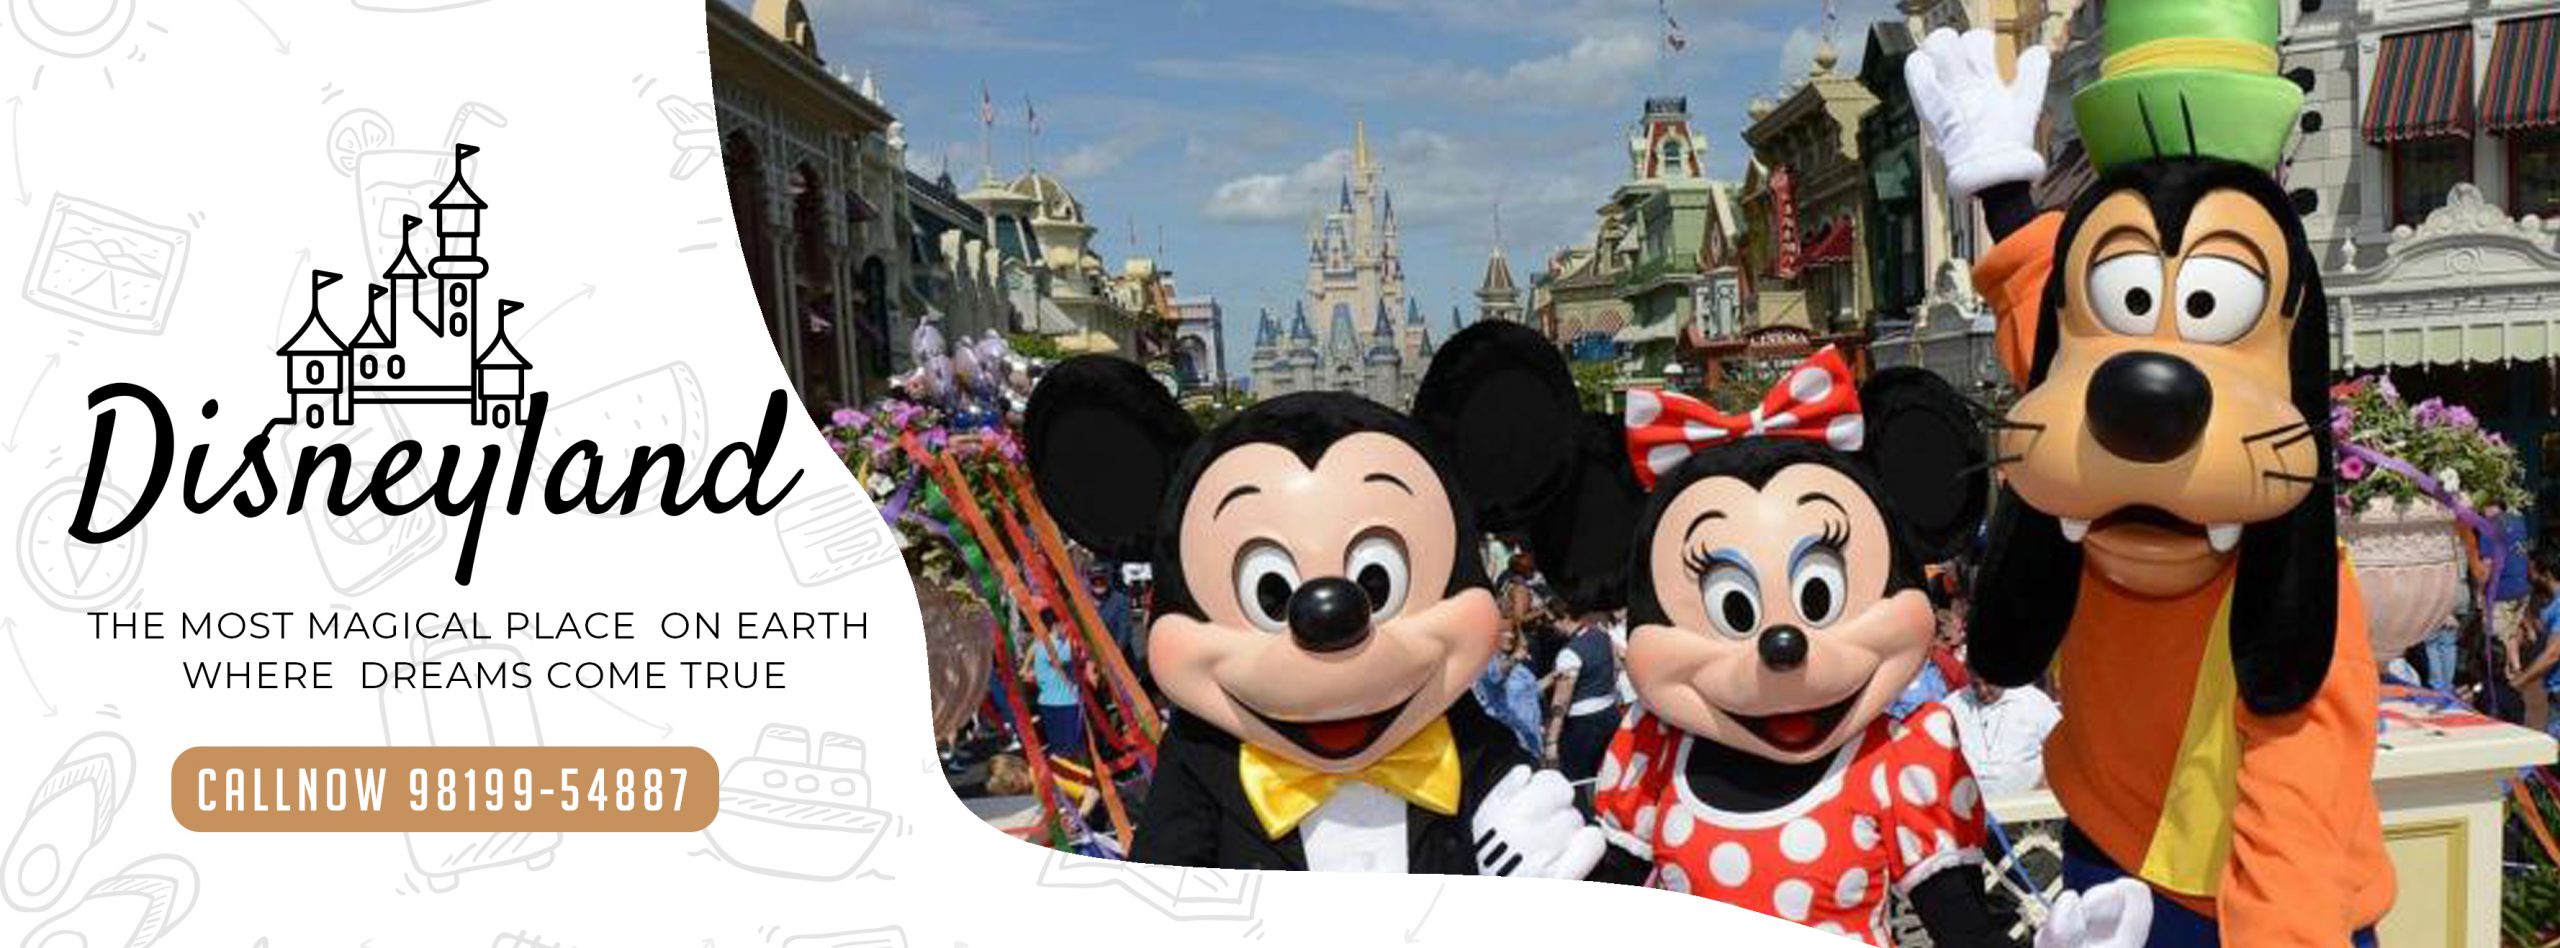 Explore-the-disney-land-with-family-trip